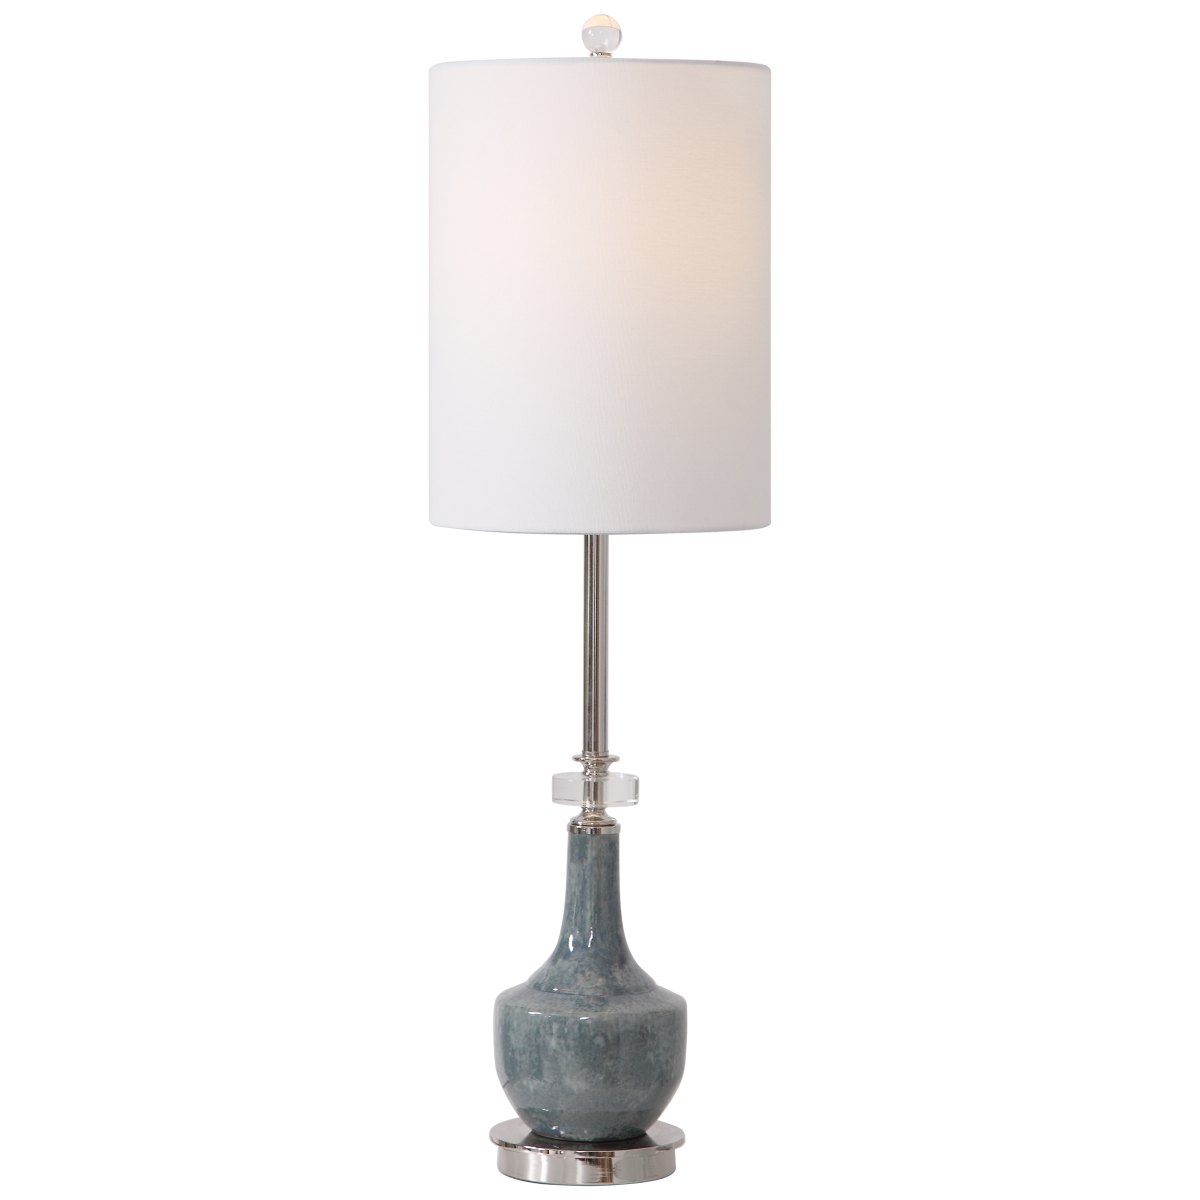 Picture of 212 Main 29698-1 Piers Mottled Blue Buffet Lamp